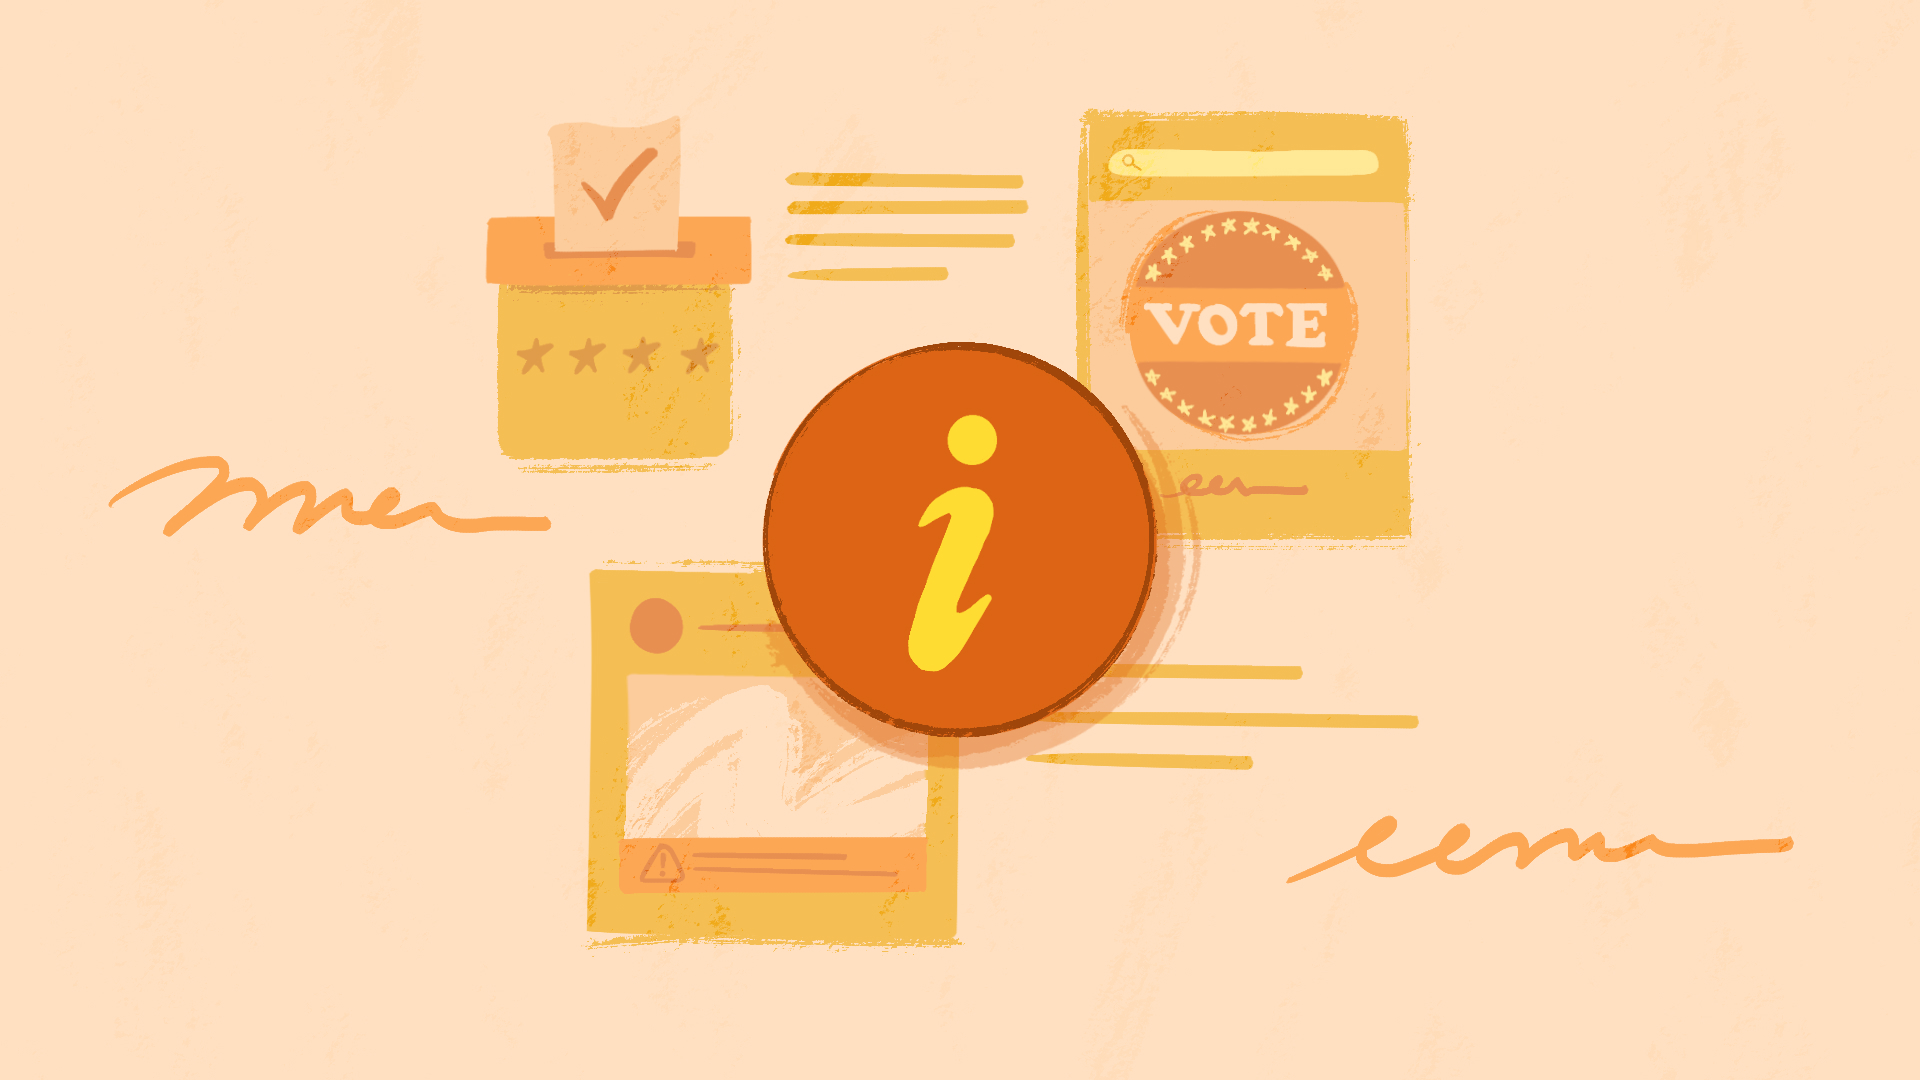 Illustration showing elections-related posts and icons